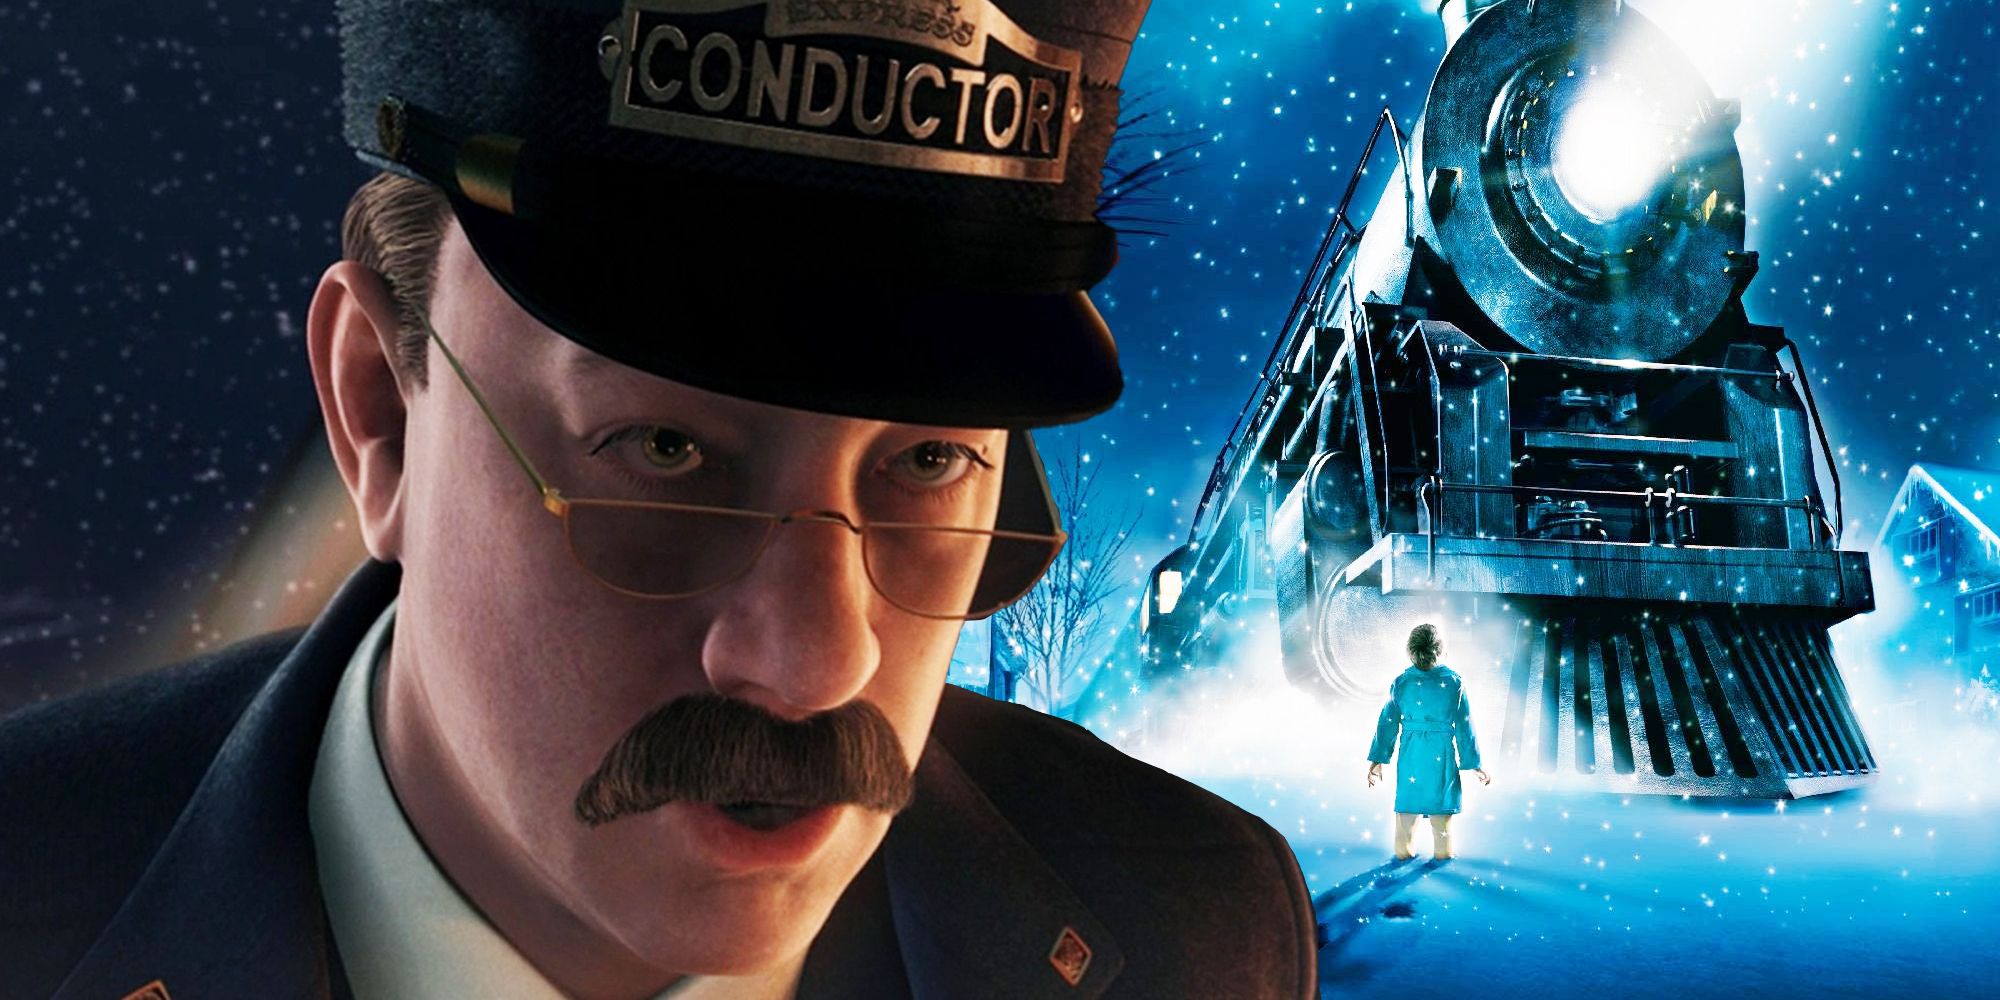 Composite image of The Conductor, voiced by Tom Hanks, and the Polar Express train from The Polar Express, directed by Ron Howard in 2004